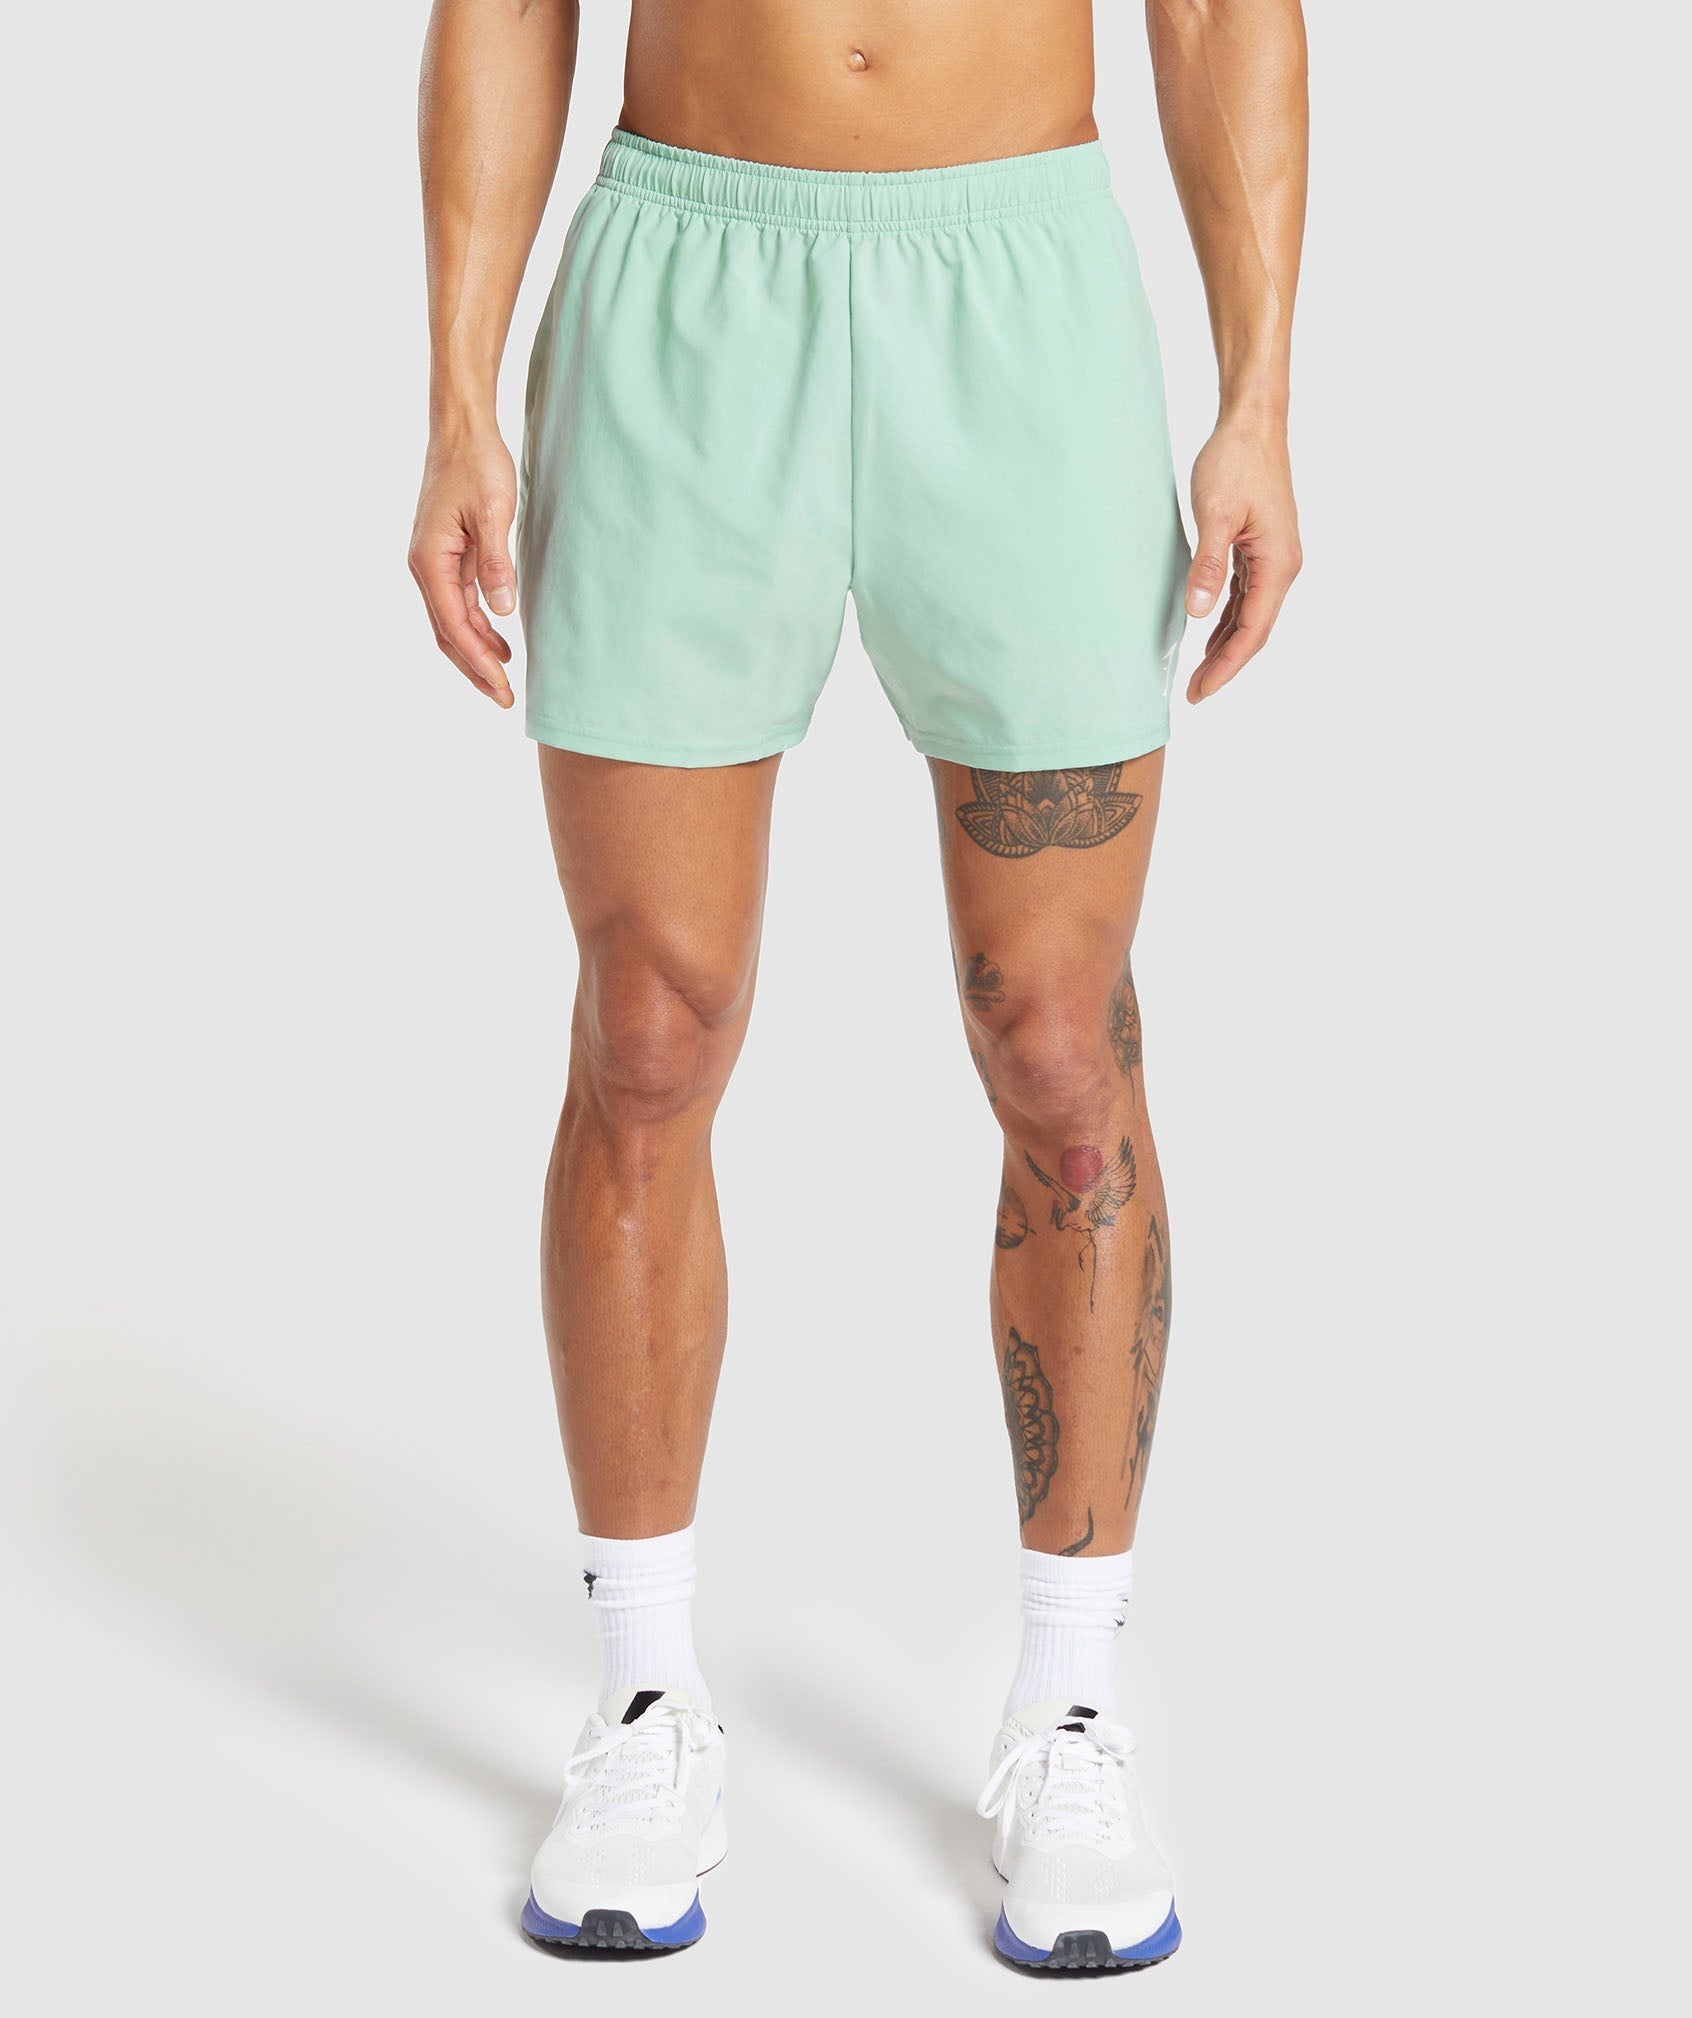 Arrival 5" Shorts in Lido Green - view 1